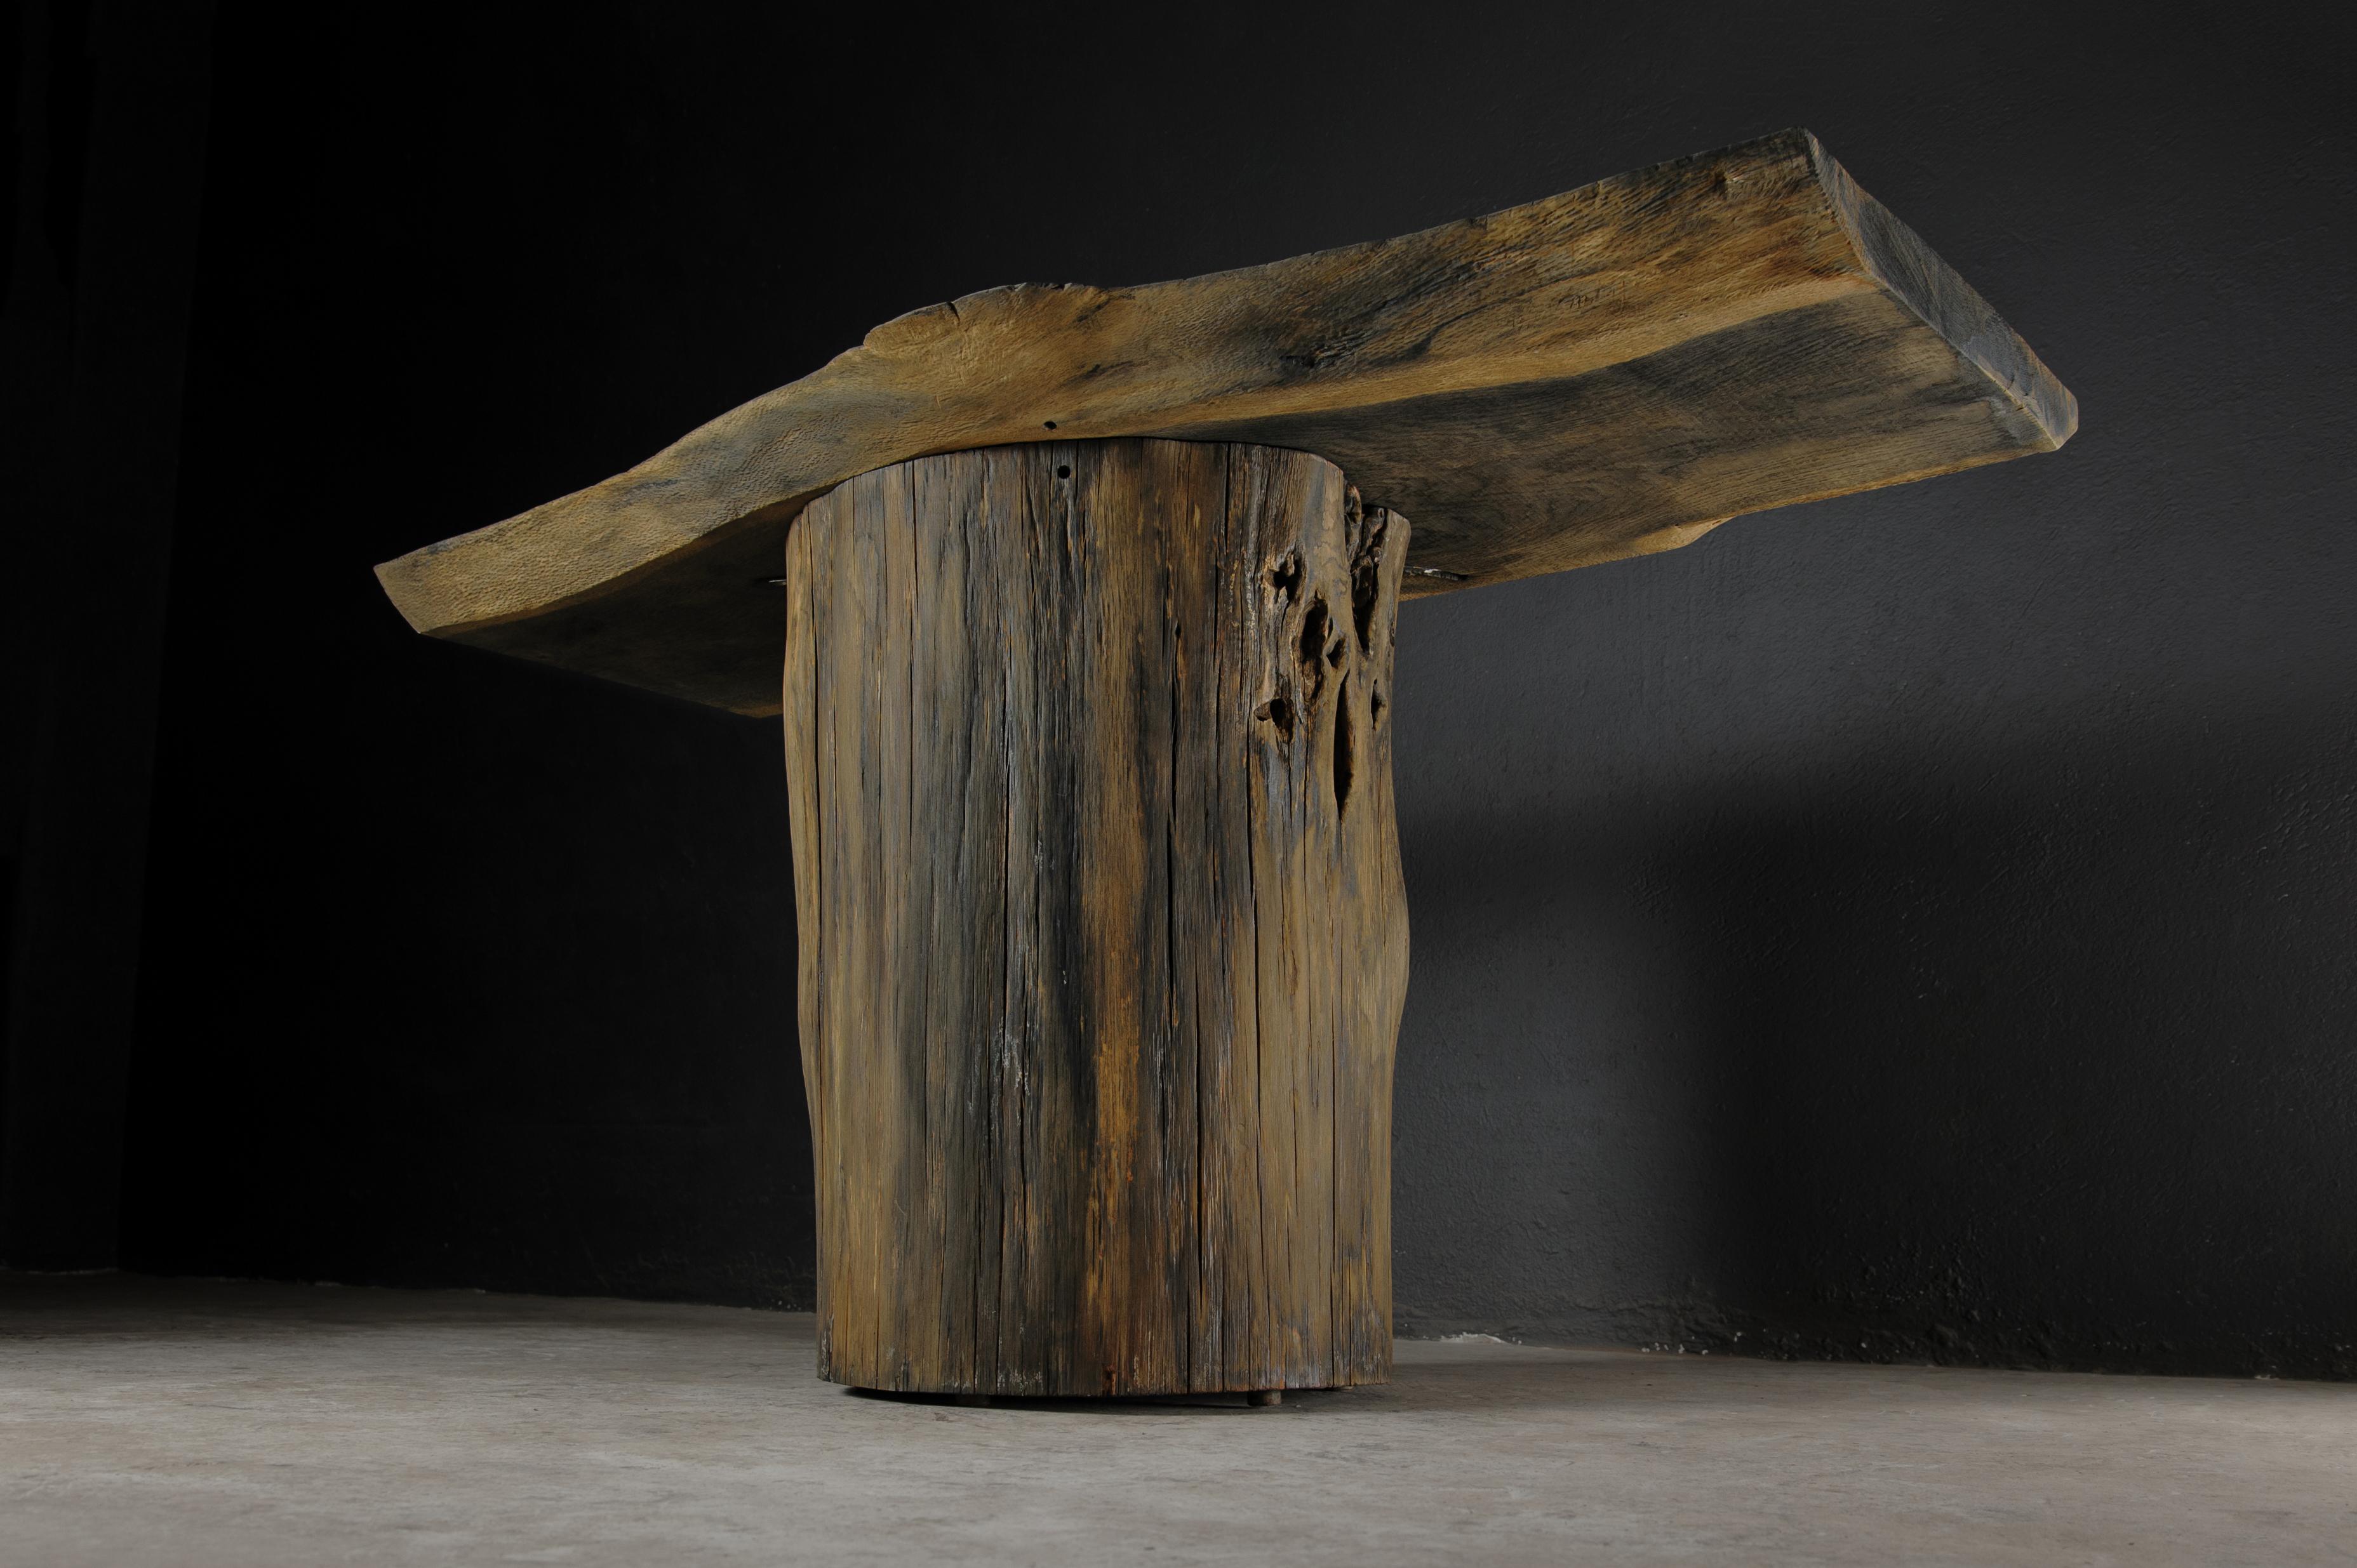 Massive console table of solid oak (+ linseed oil)

Dimensions: H. 75 cm x W. 142 cm x D. 51 cm

Warm furniture’s made by the designer Denis Milovanov from 